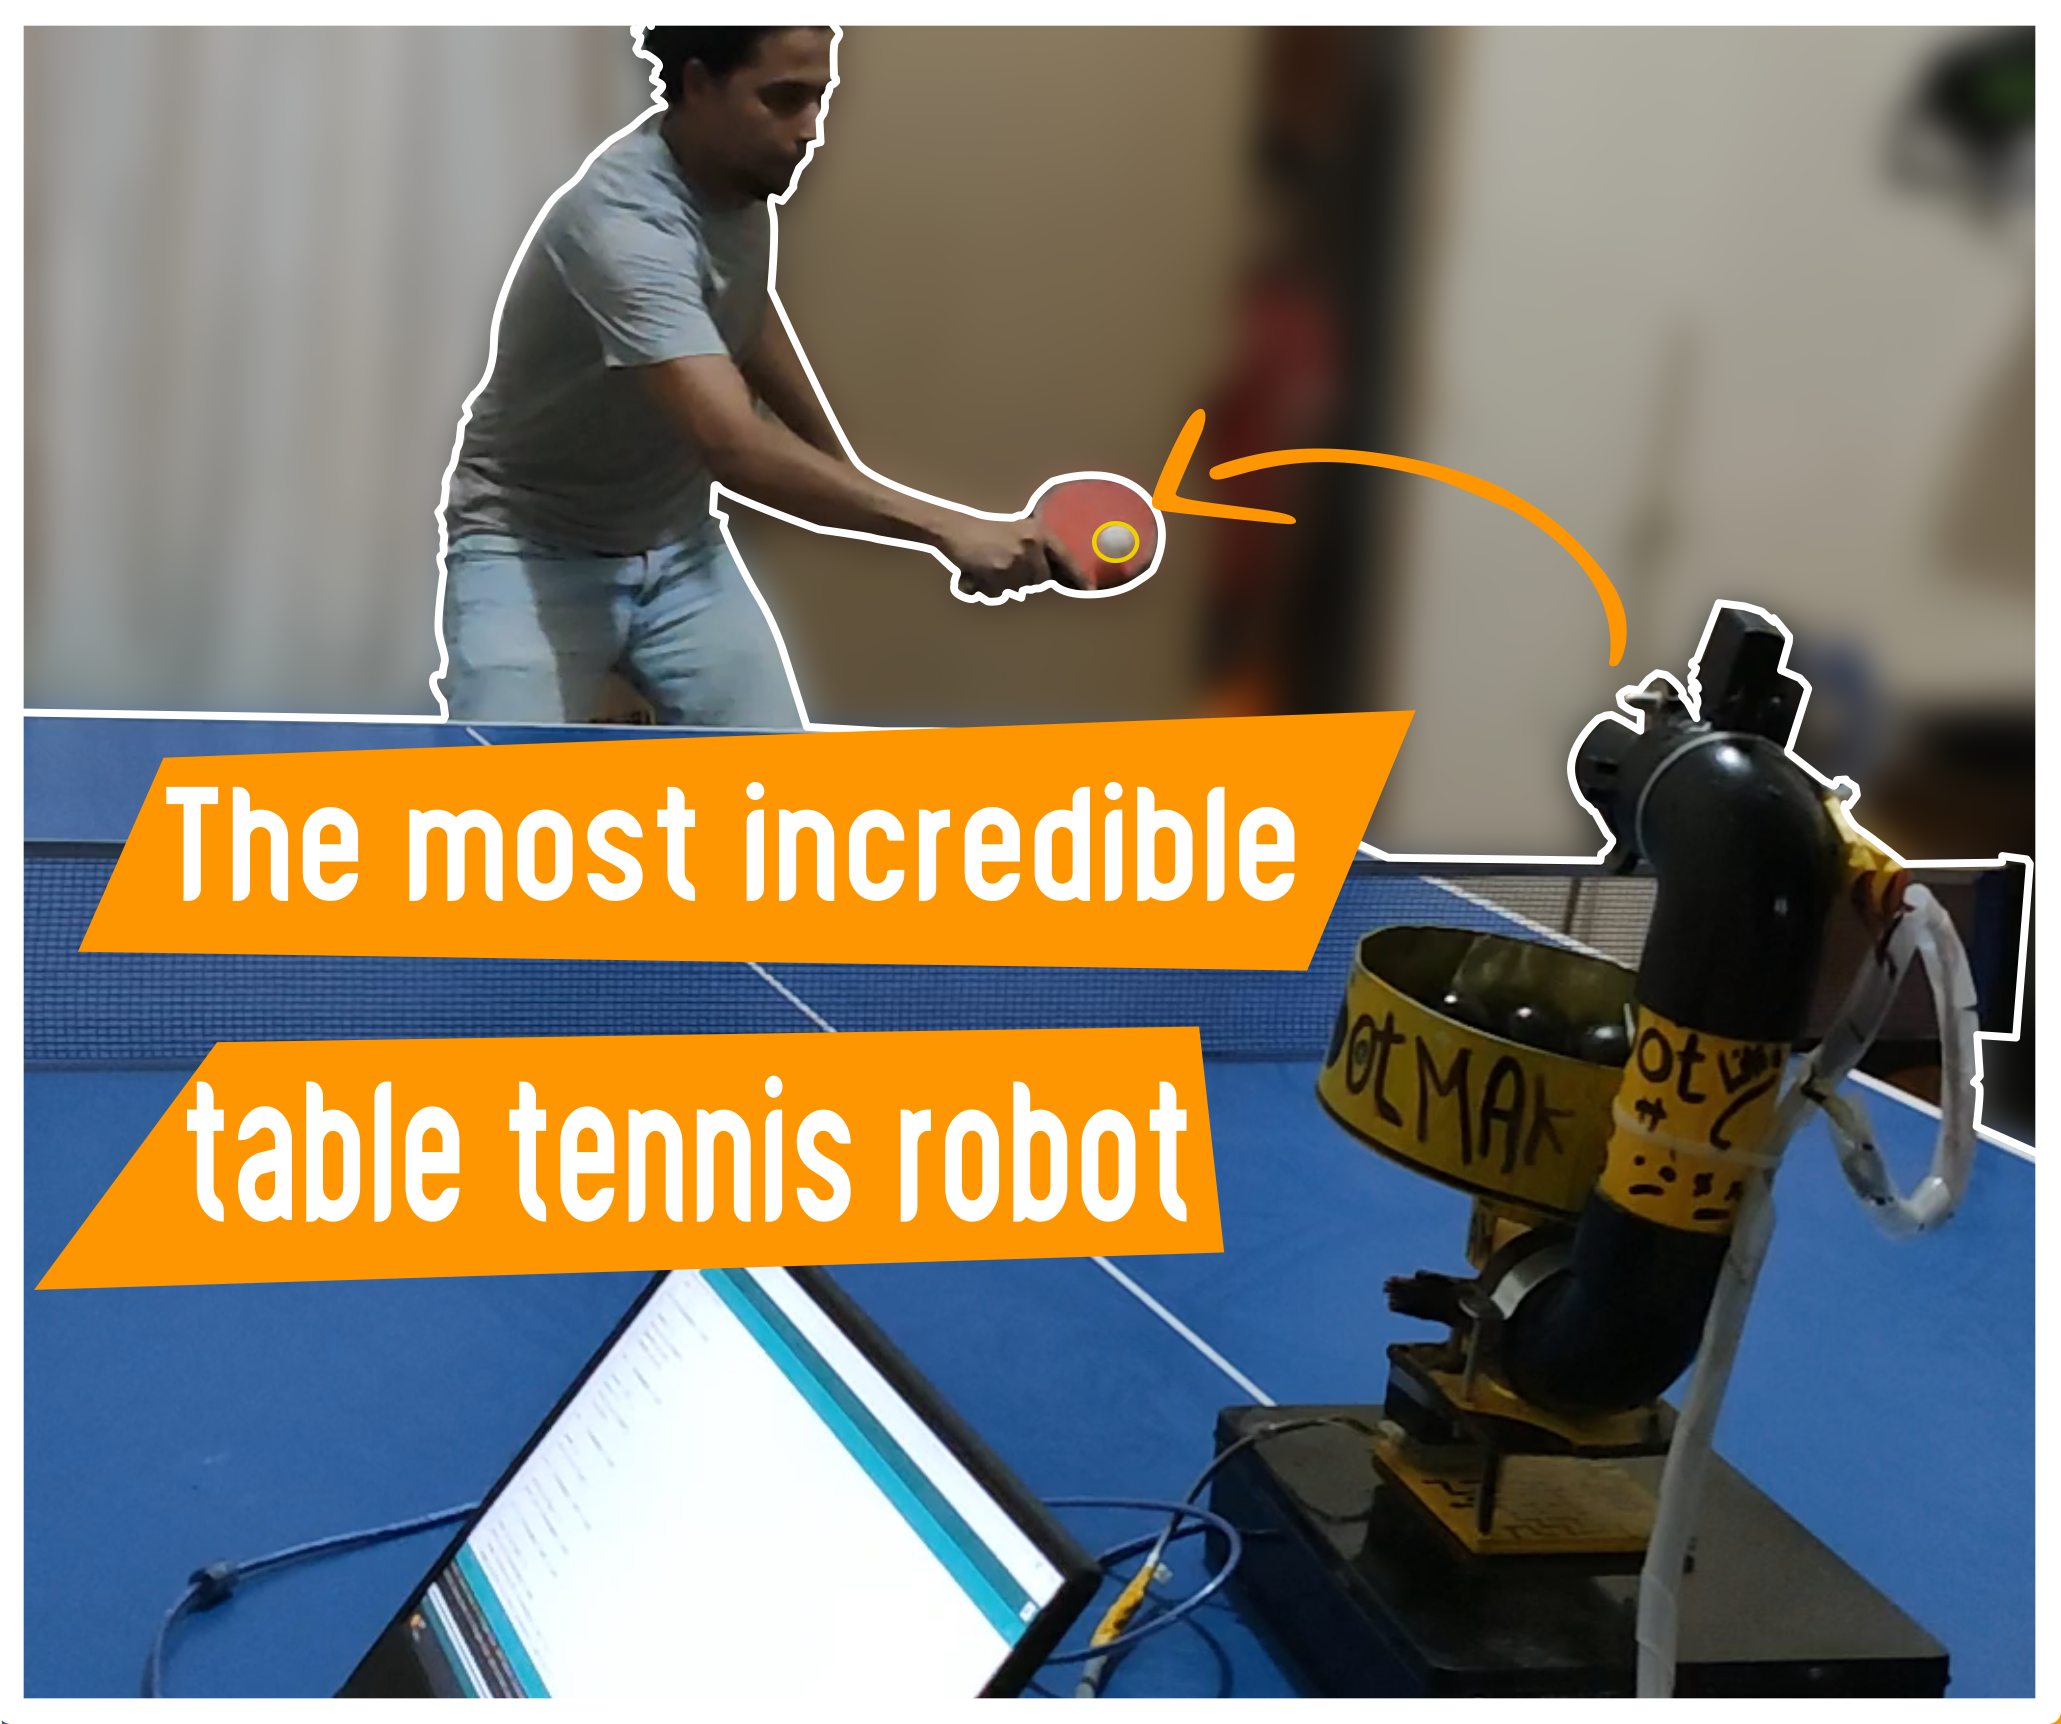 How Did I Make a Table Tennis Table Robot?